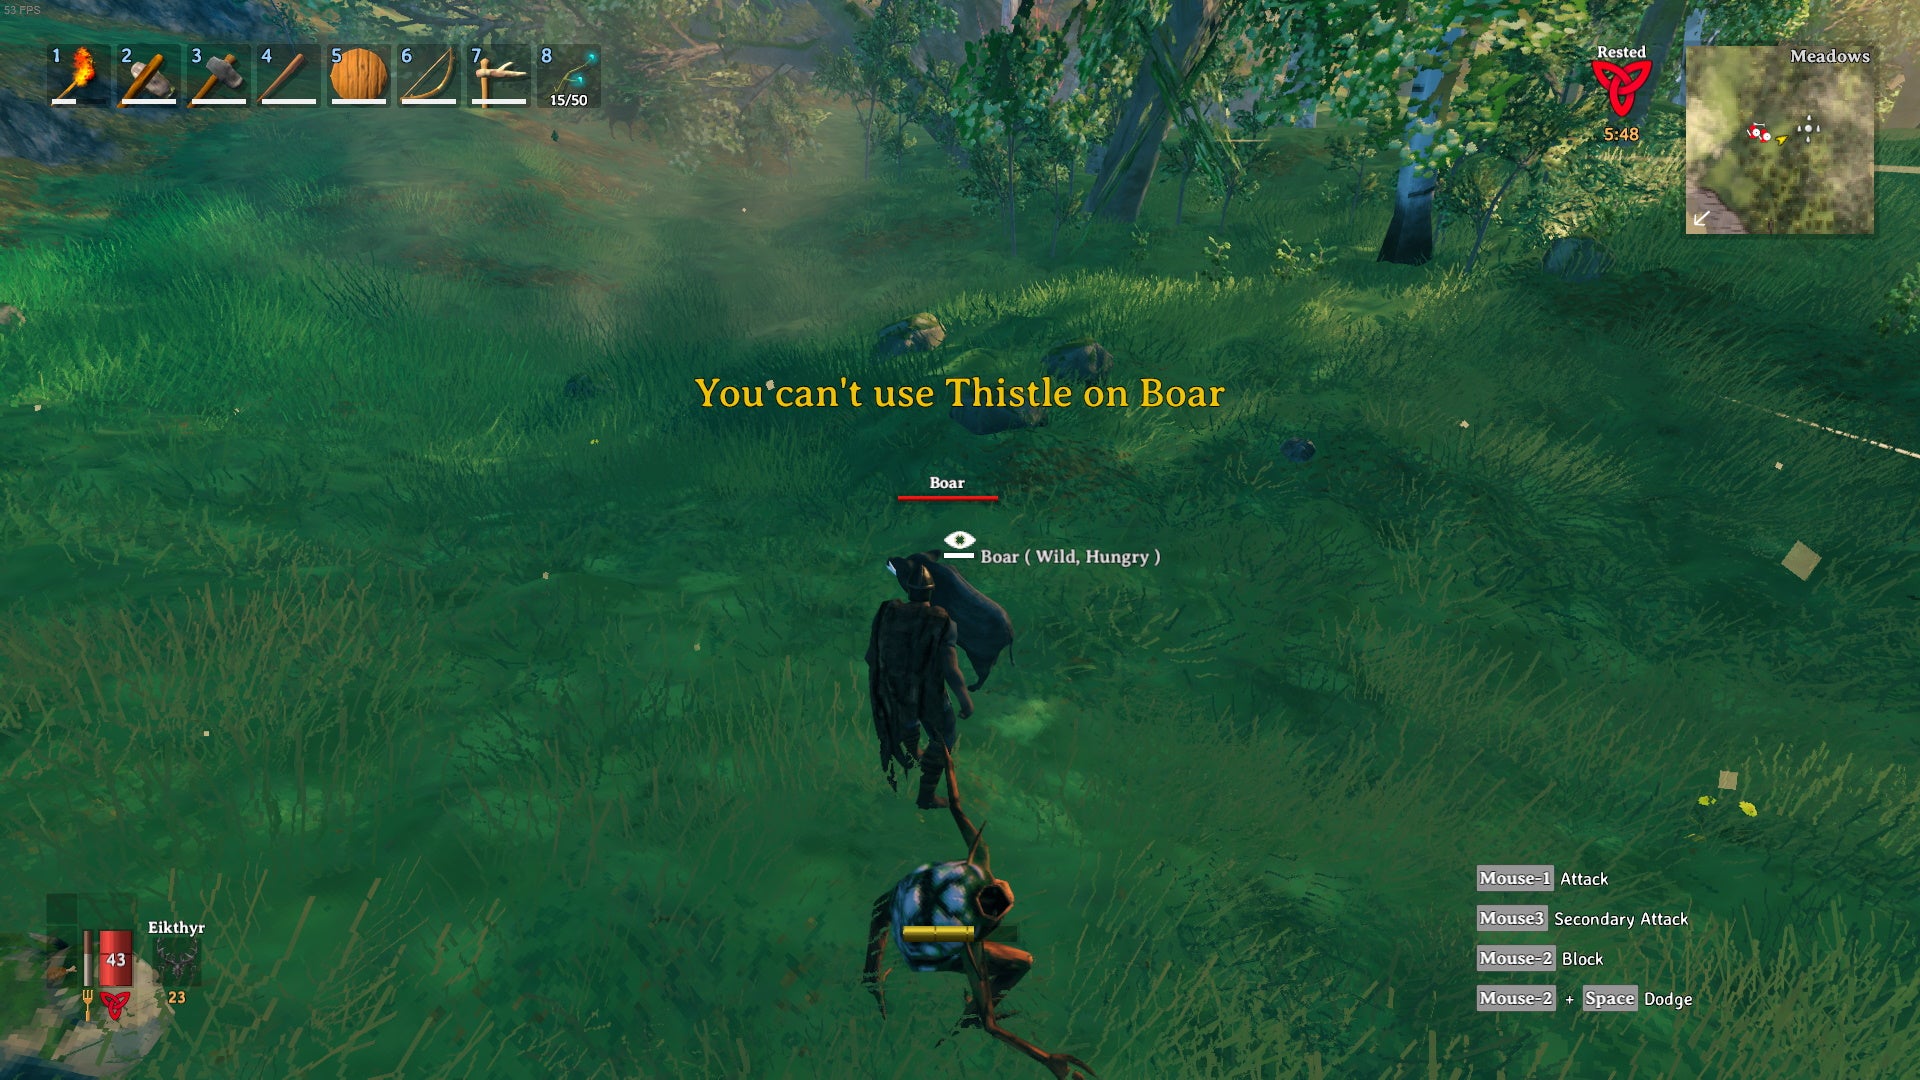 I try and use a thistle on a boar, and in big yellow letters it says, "You cannot use Thistle on boar".